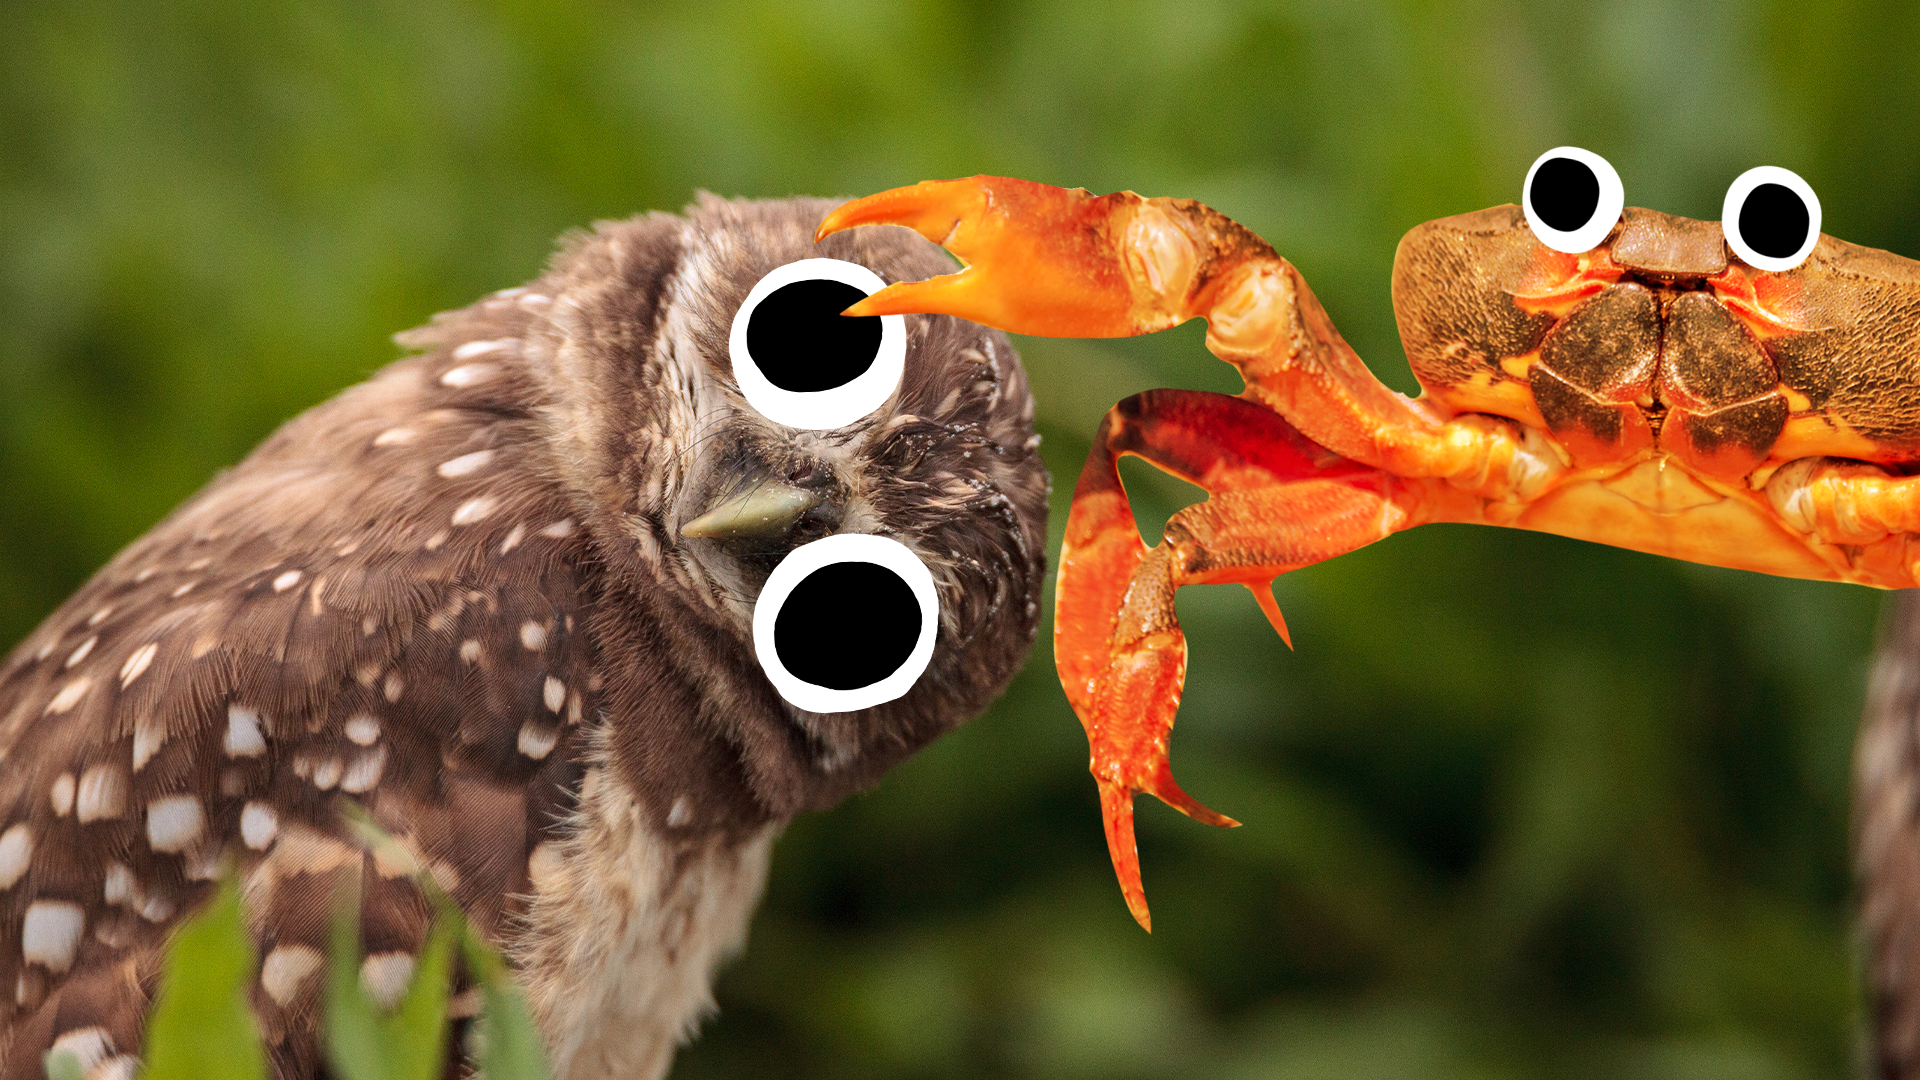 A quirky owl and crab